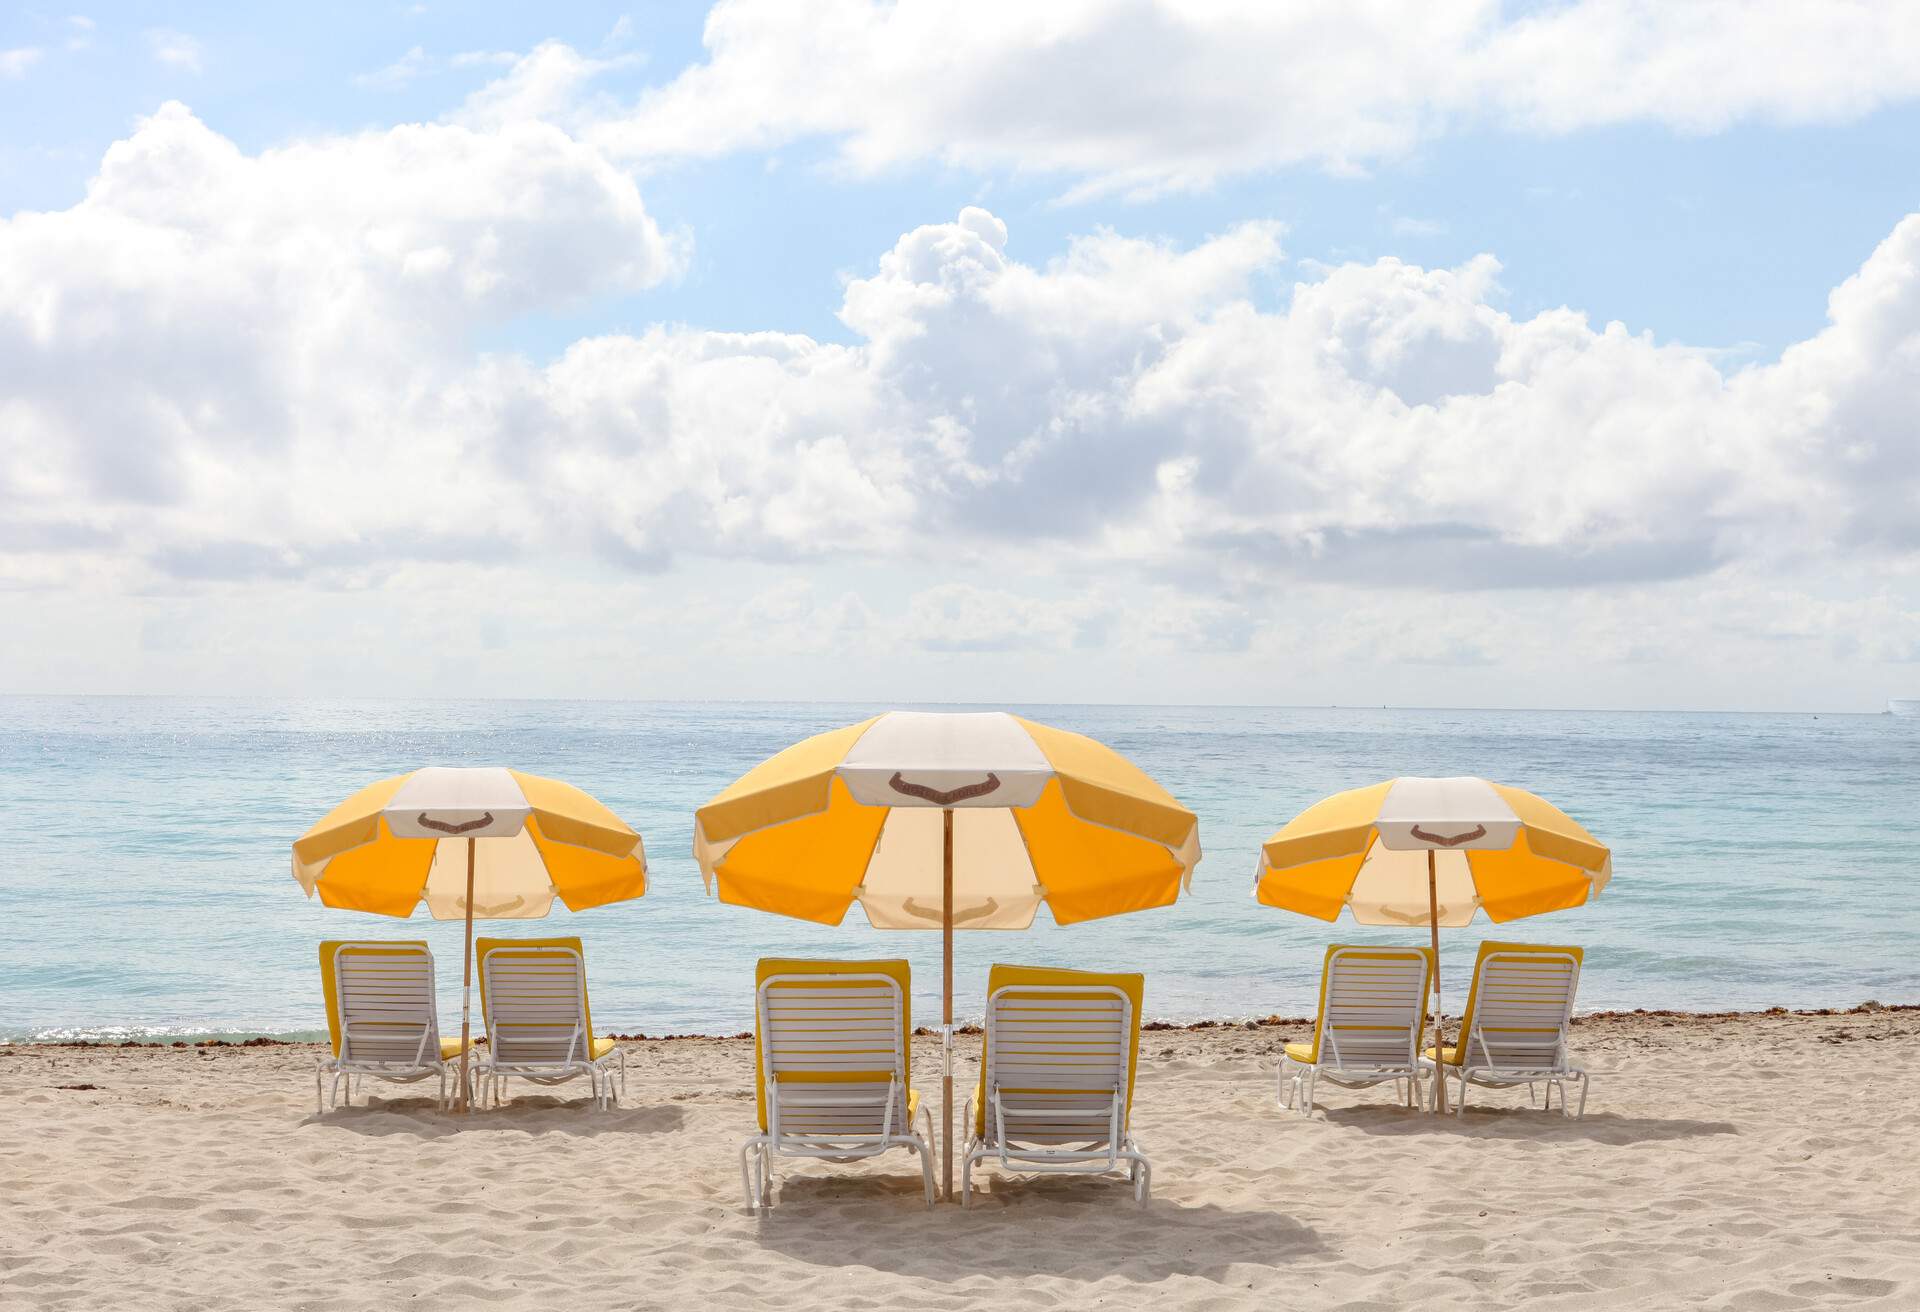 Yellow and white striped beach umbrellas and sun loungers strewn on the sand towards the sea.